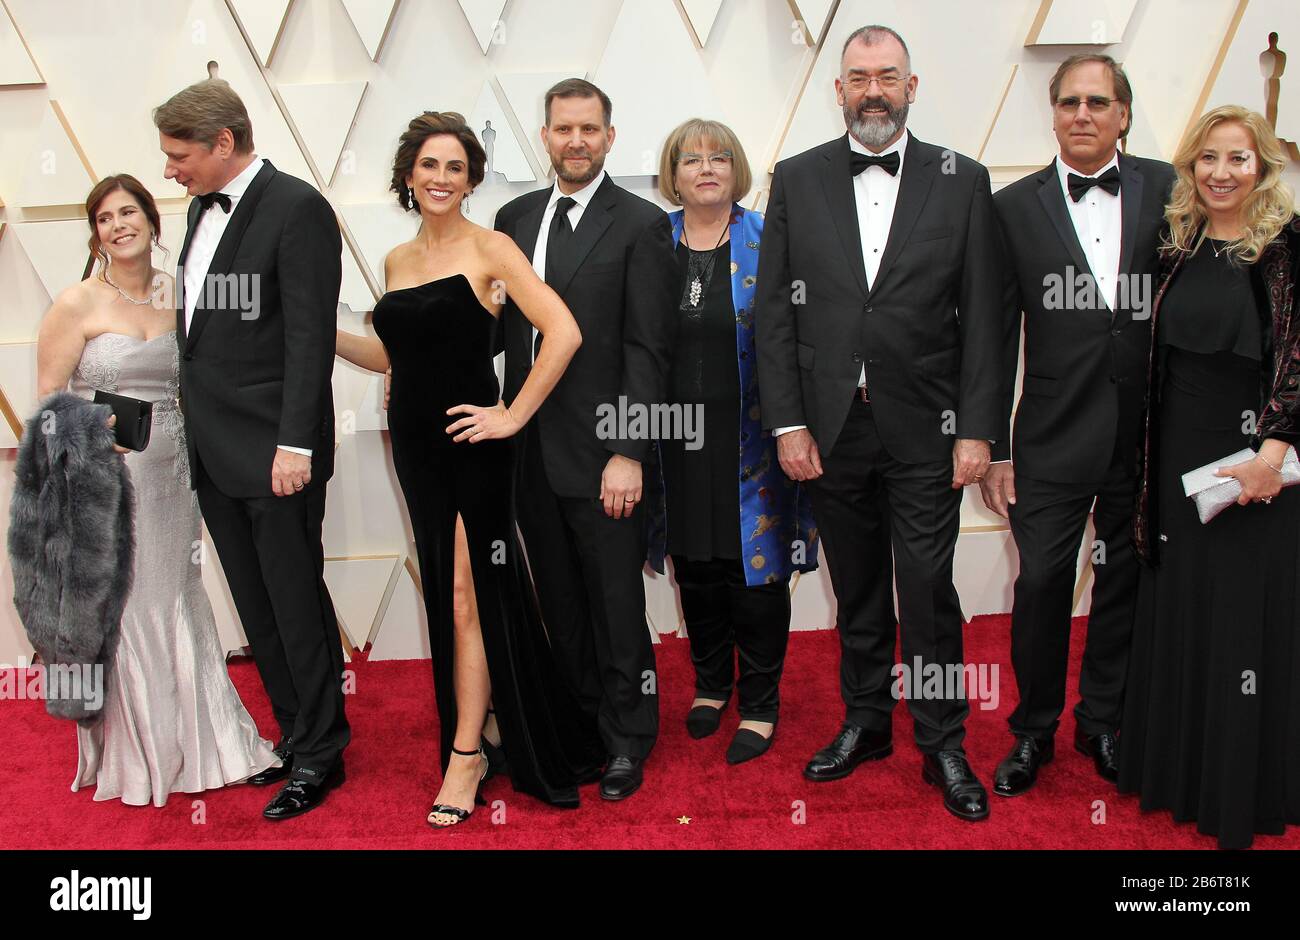 92nd Academy Awards (Oscars 2020) - Arrivals held at the Dolby Theatre in Los Angeles, California. Featuring: Guests Where: Los Angeles, California, United States When: 09 Feb 2020 Credit: Adriana M. Barraza/WENN Stock Photo